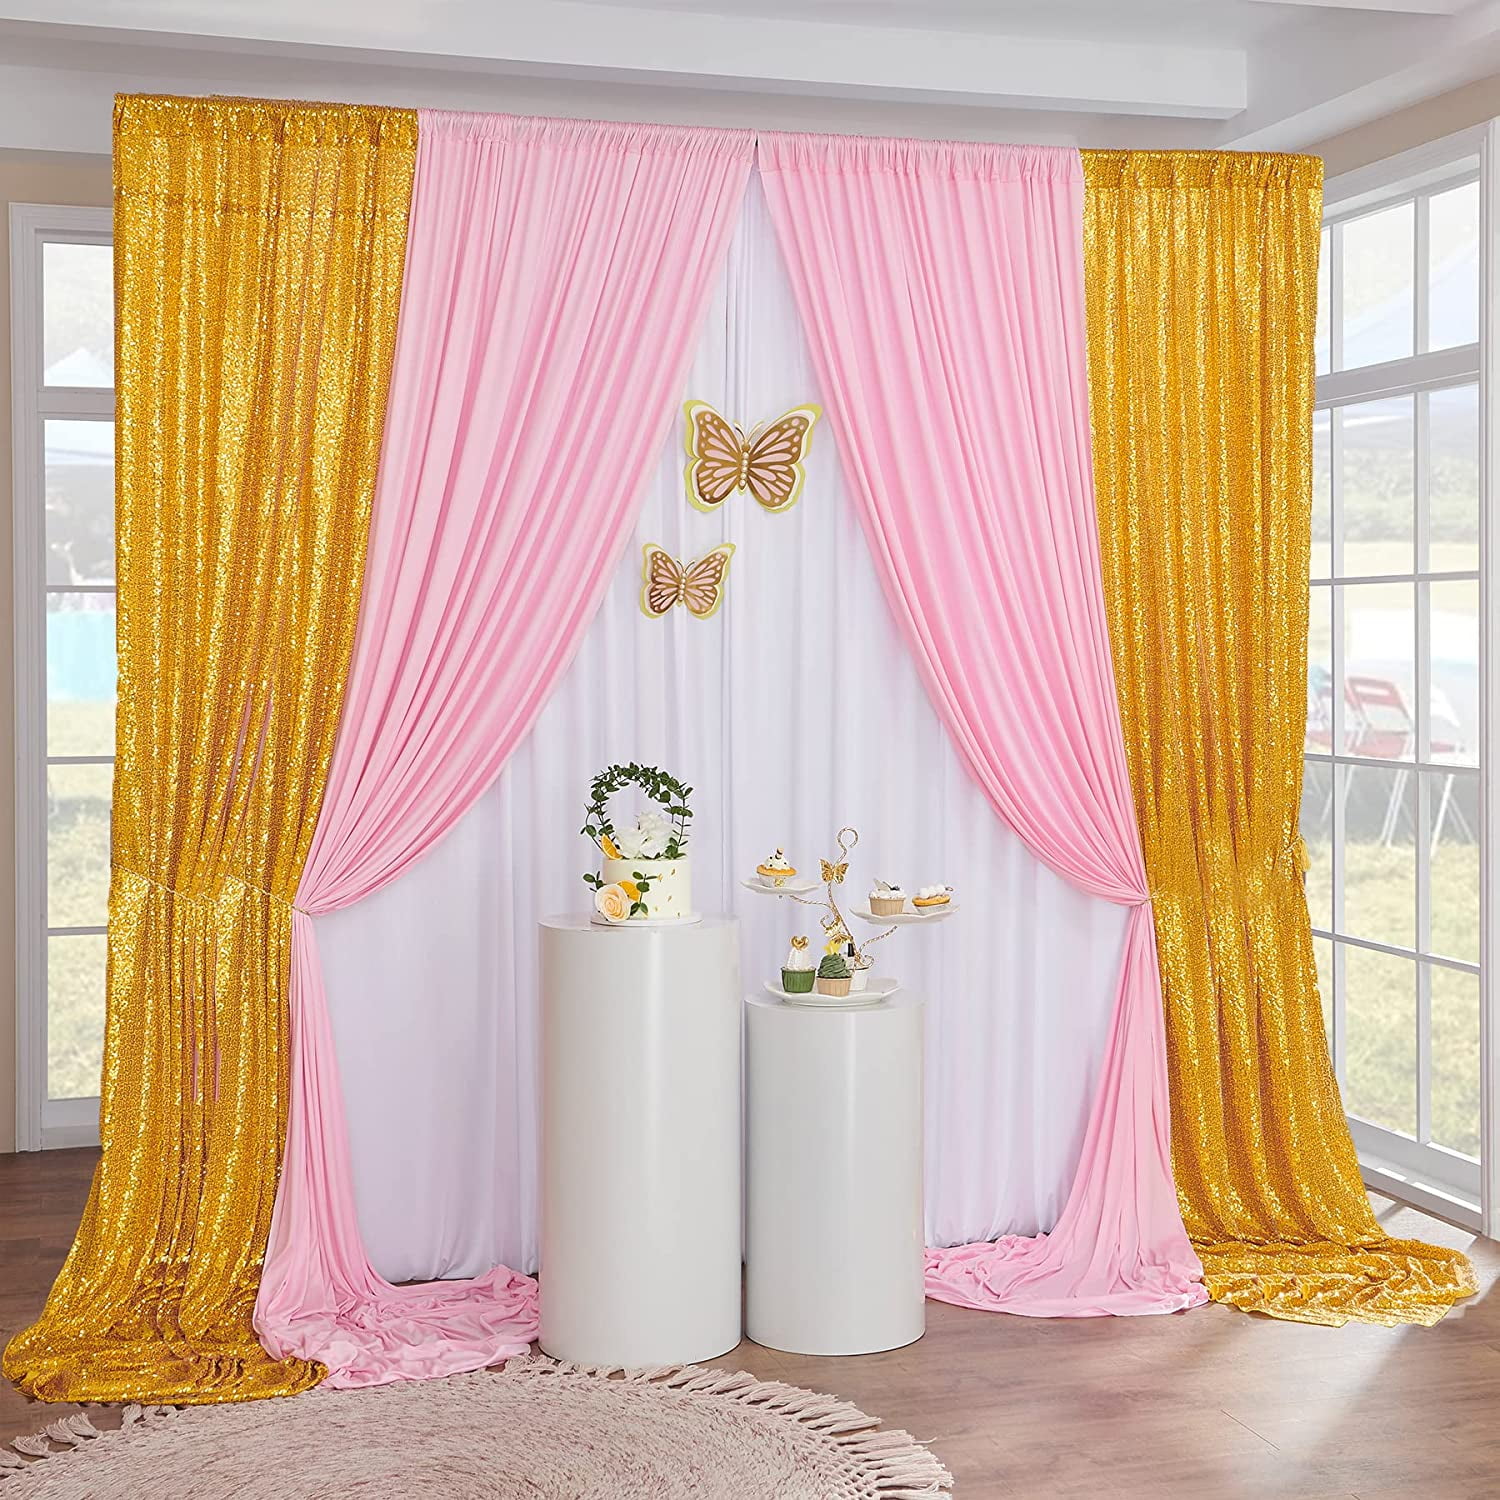 10x10ft White Backdrop Curtain Panels 10x10ft Pink Backdrop ...